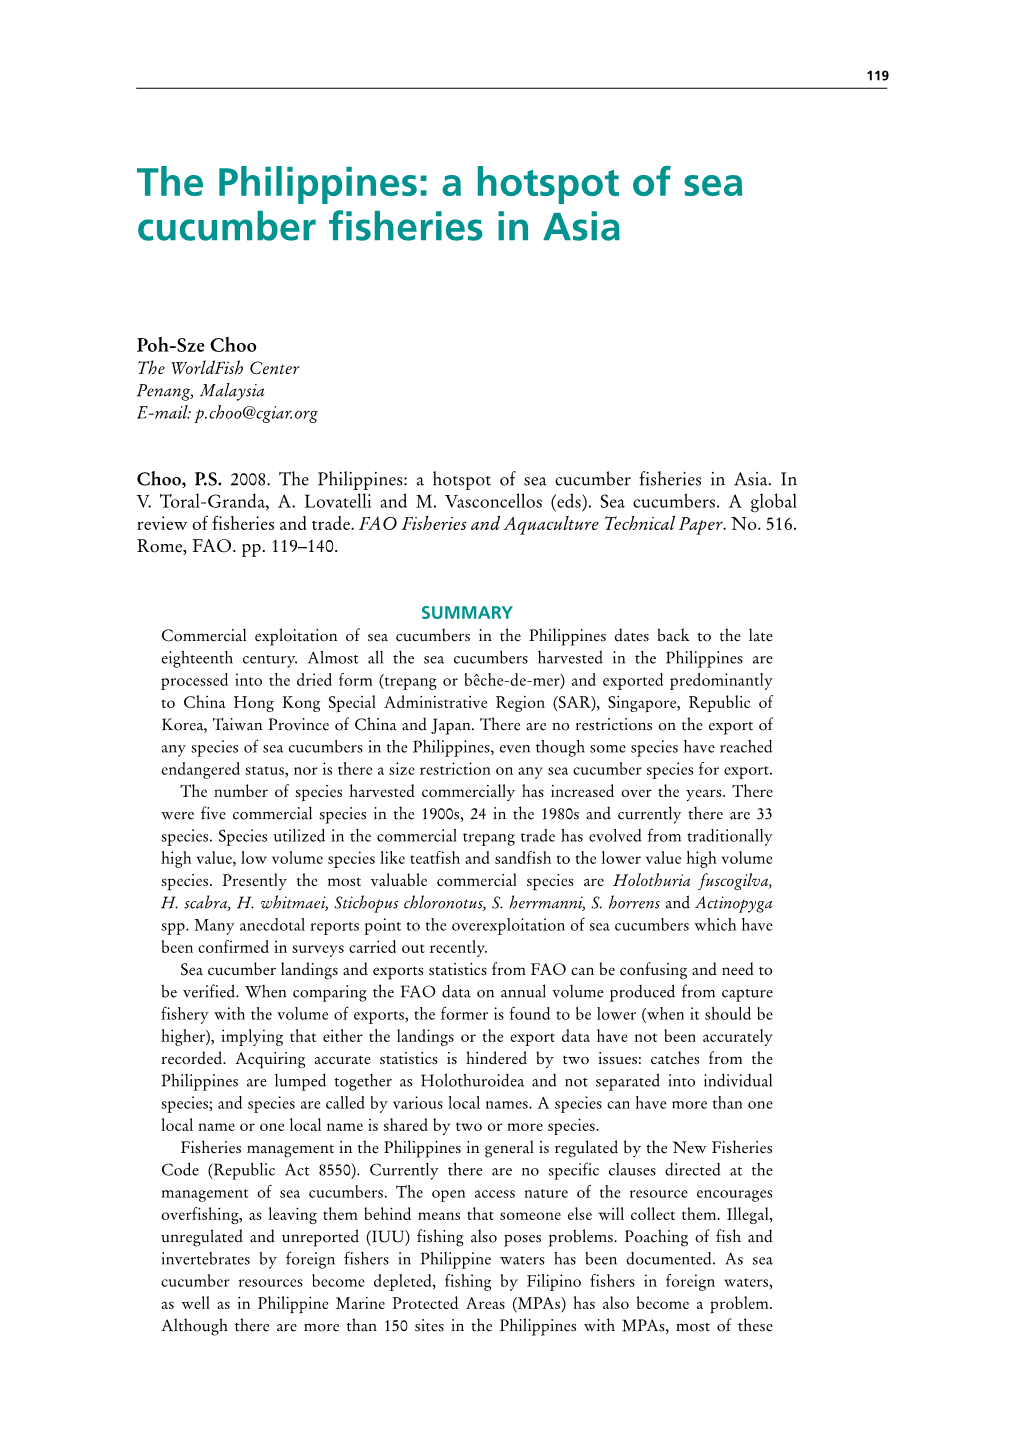 The Philippines: a Hotspot of Sea Cucumber Fisheries in Asia